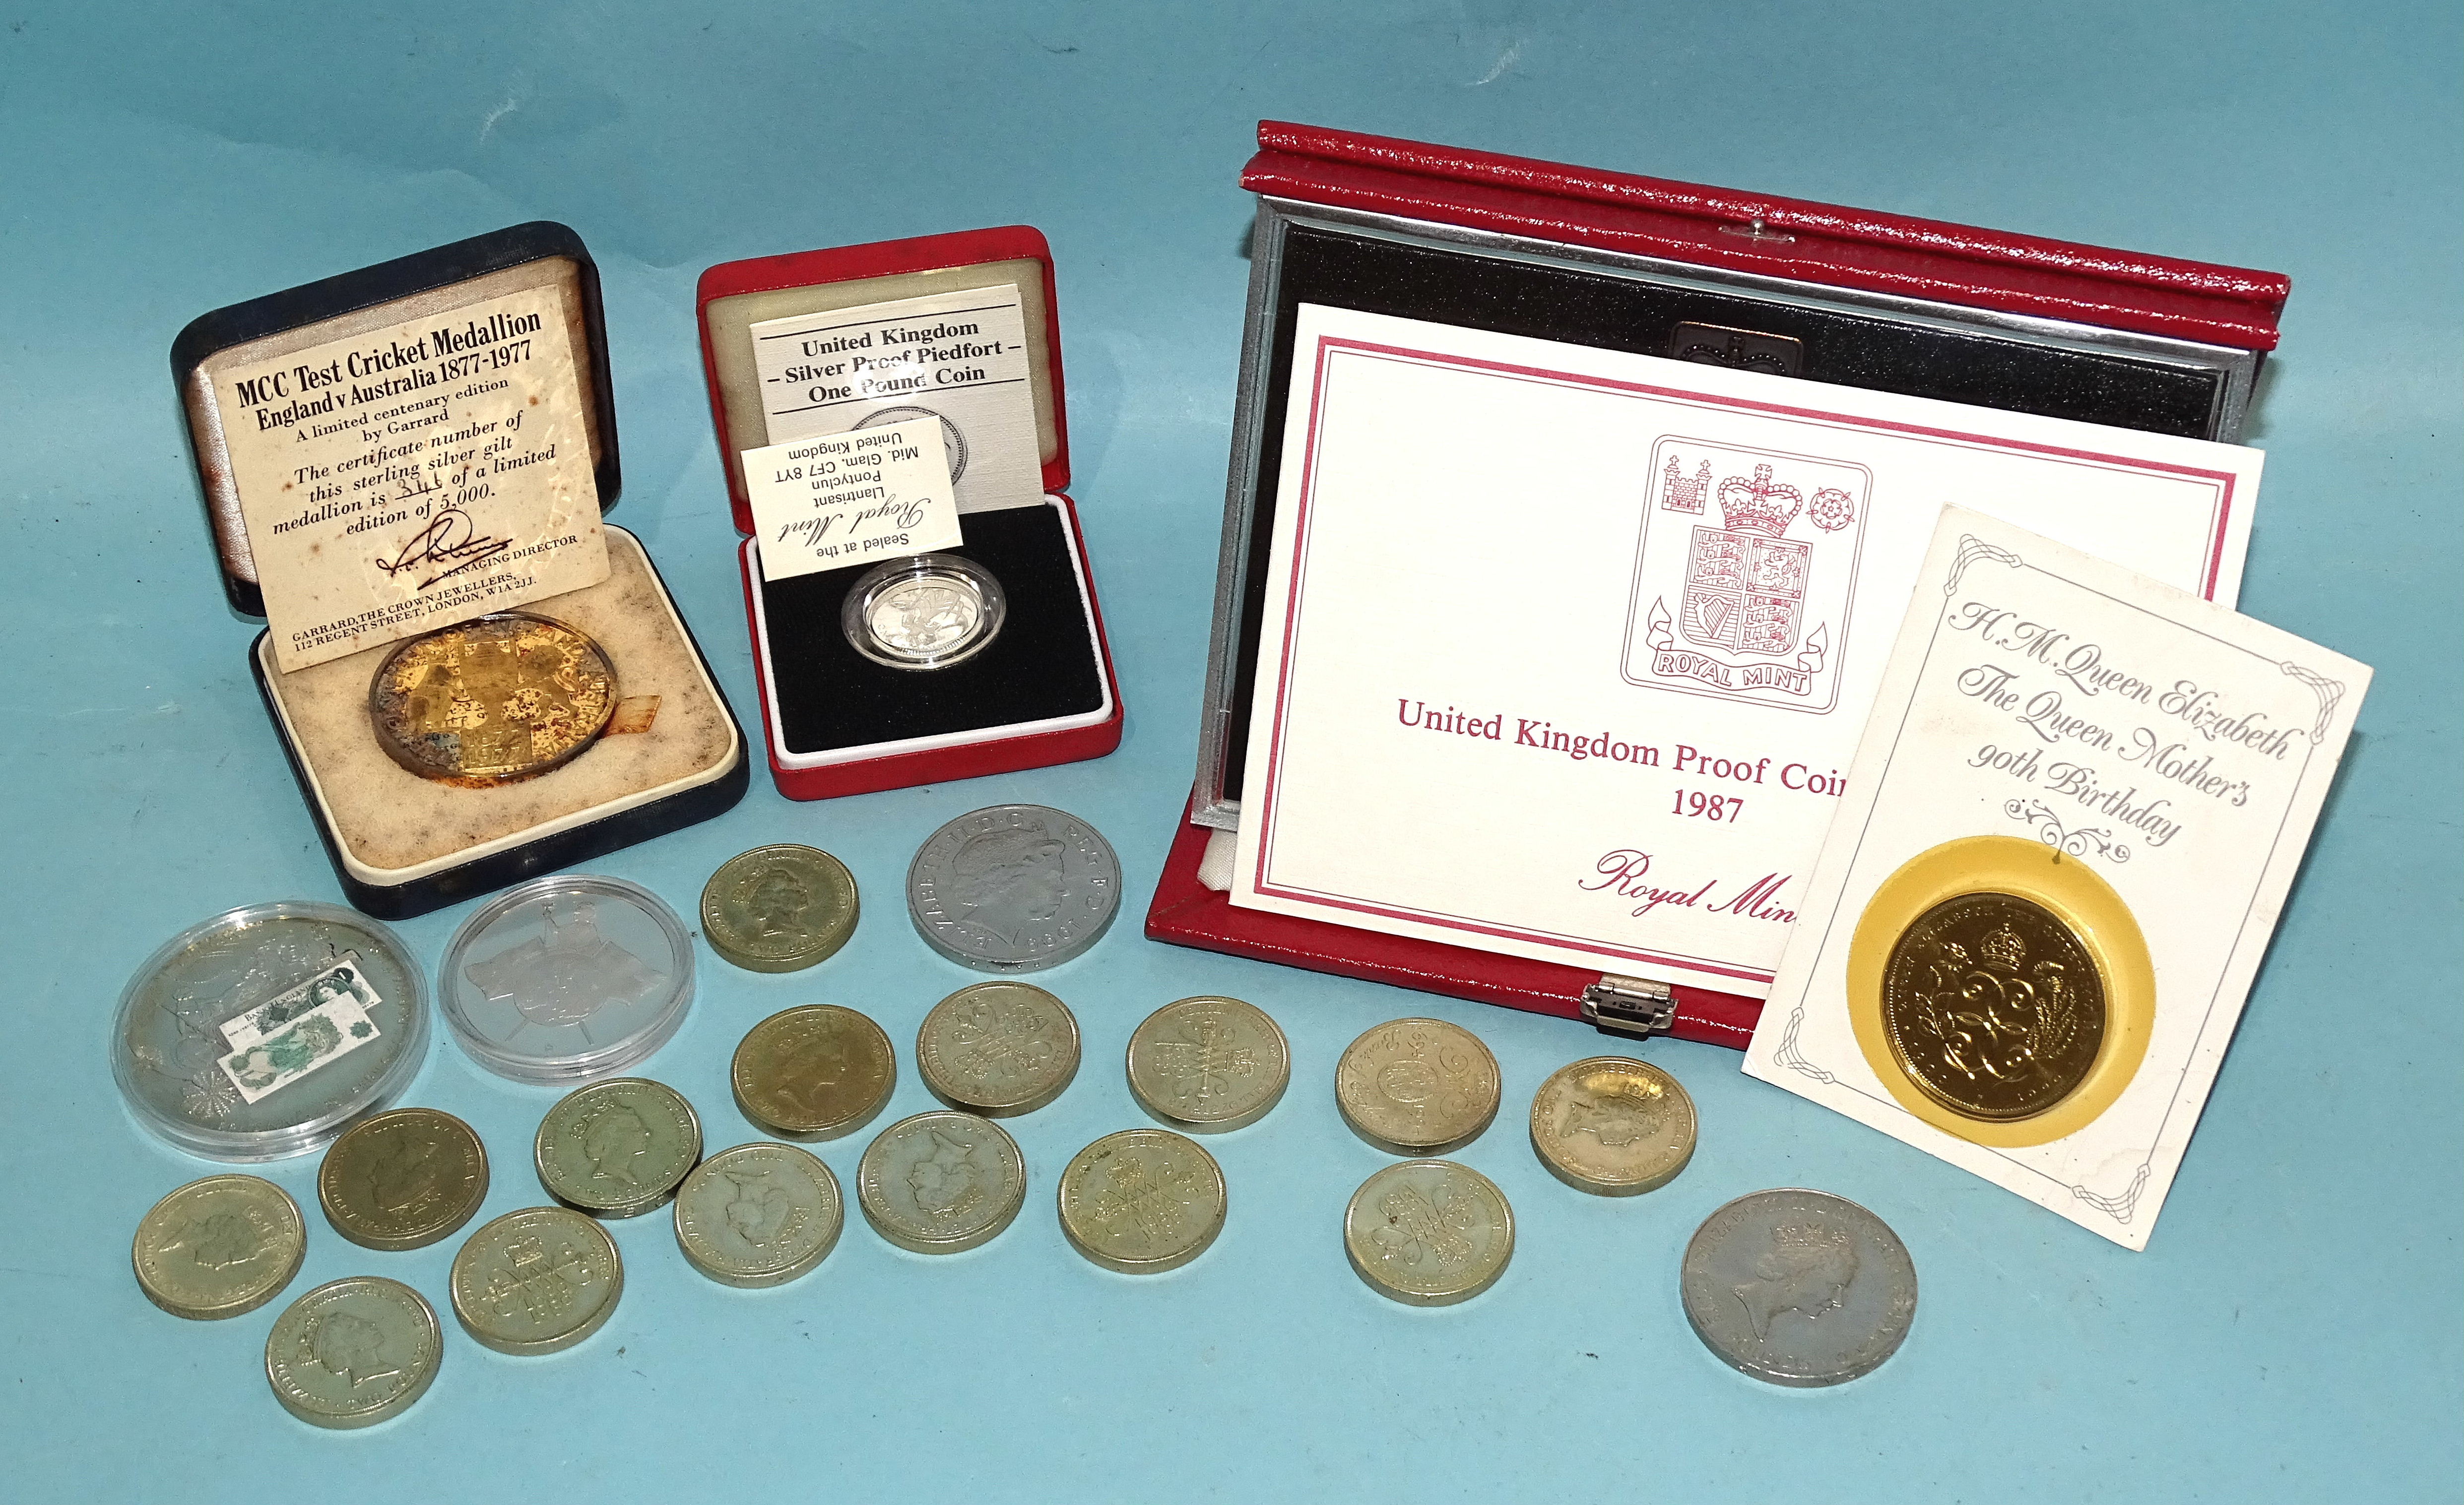 A Royal Mint United Kingdom silver proof Piedfort one-pound coin, with certificate of